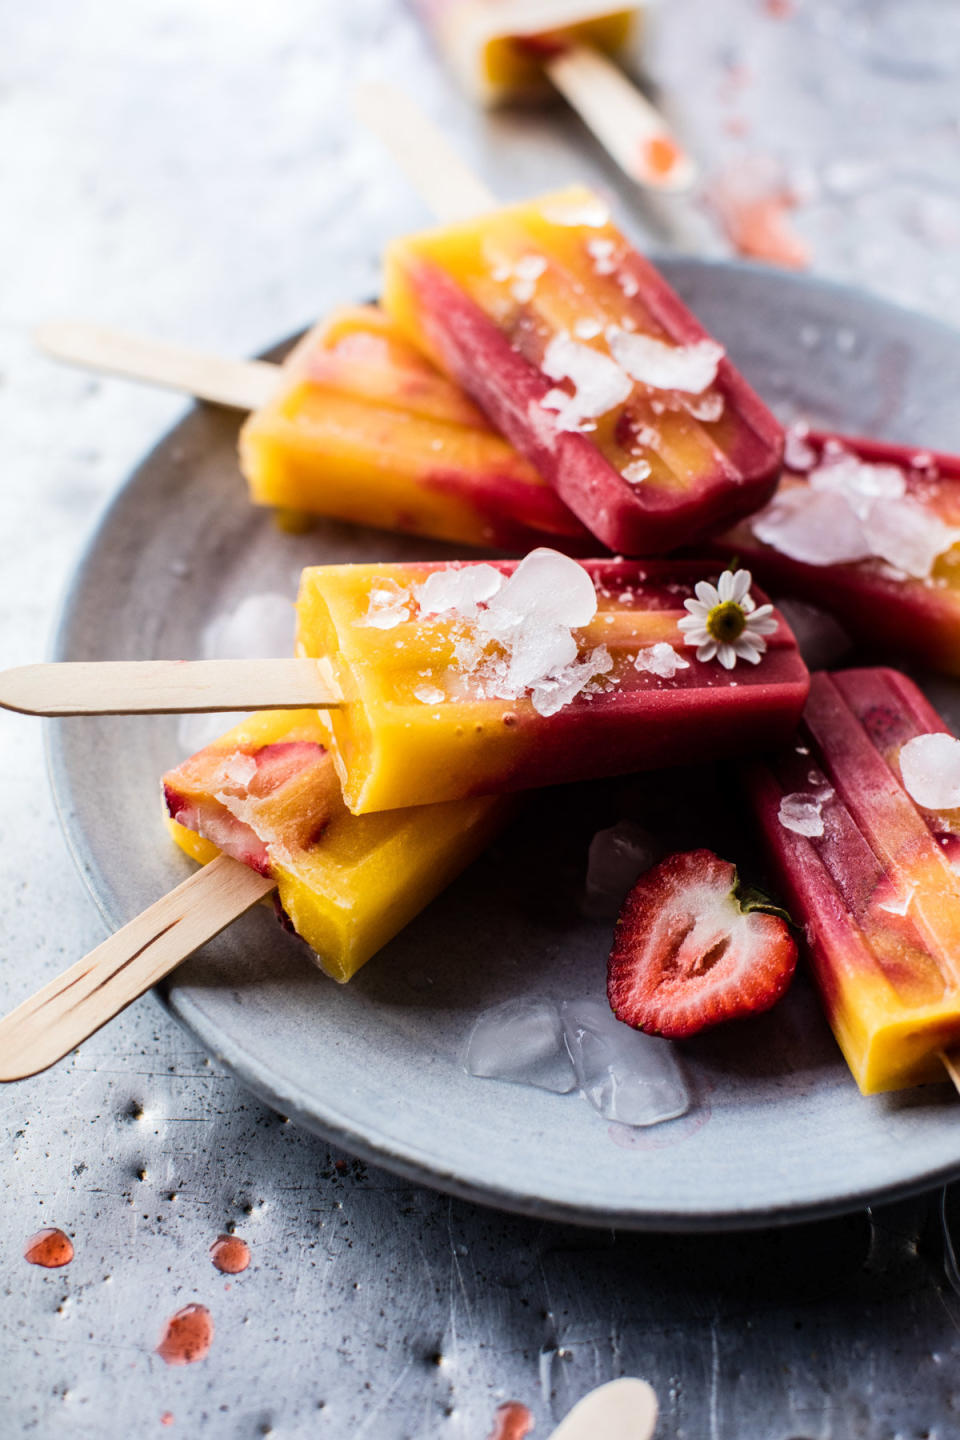 <strong>Get the <a href="http://www.halfbakedharvest.com/3-ingredient-strawberry-mango-popsicles/" target="_blank">3-Ingredient Strawberry Mango Popsicles recipe</a>&nbsp;from Half Baked Harvest</strong>